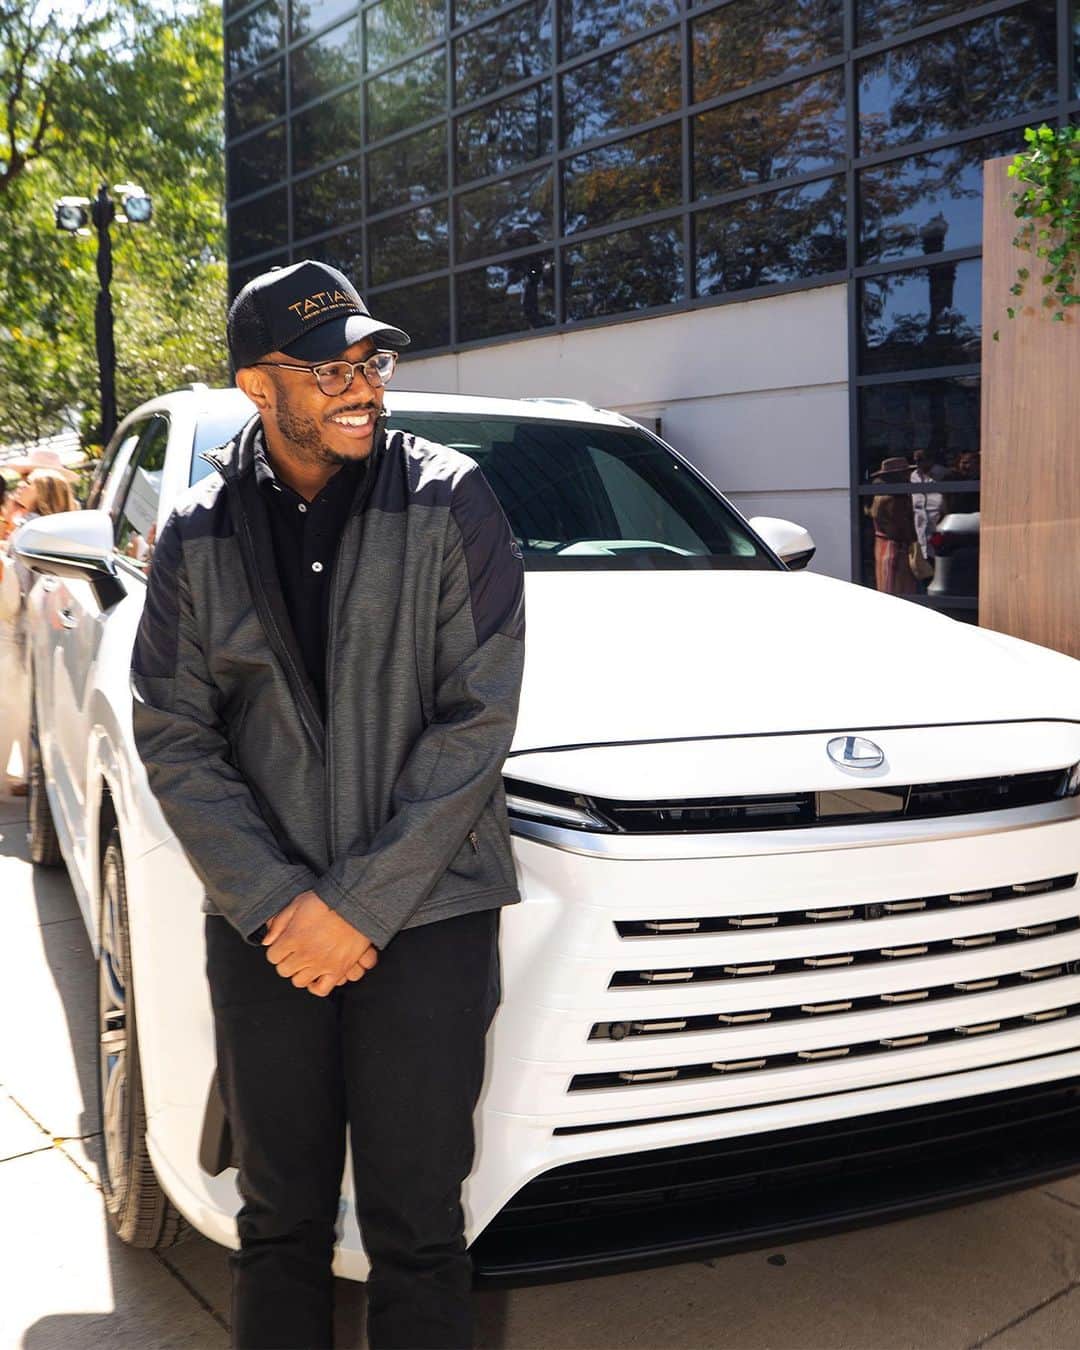 Lexus USAのインスタグラム：「@lexususa + @chefkwameonwuachi: The perfect recipe for an amazing Grand Cru at #ChicagoGourmet. And also some great Truffle Braised Short Rib with Coconut Rice & Peas. #Lexus #LexusCulinary」